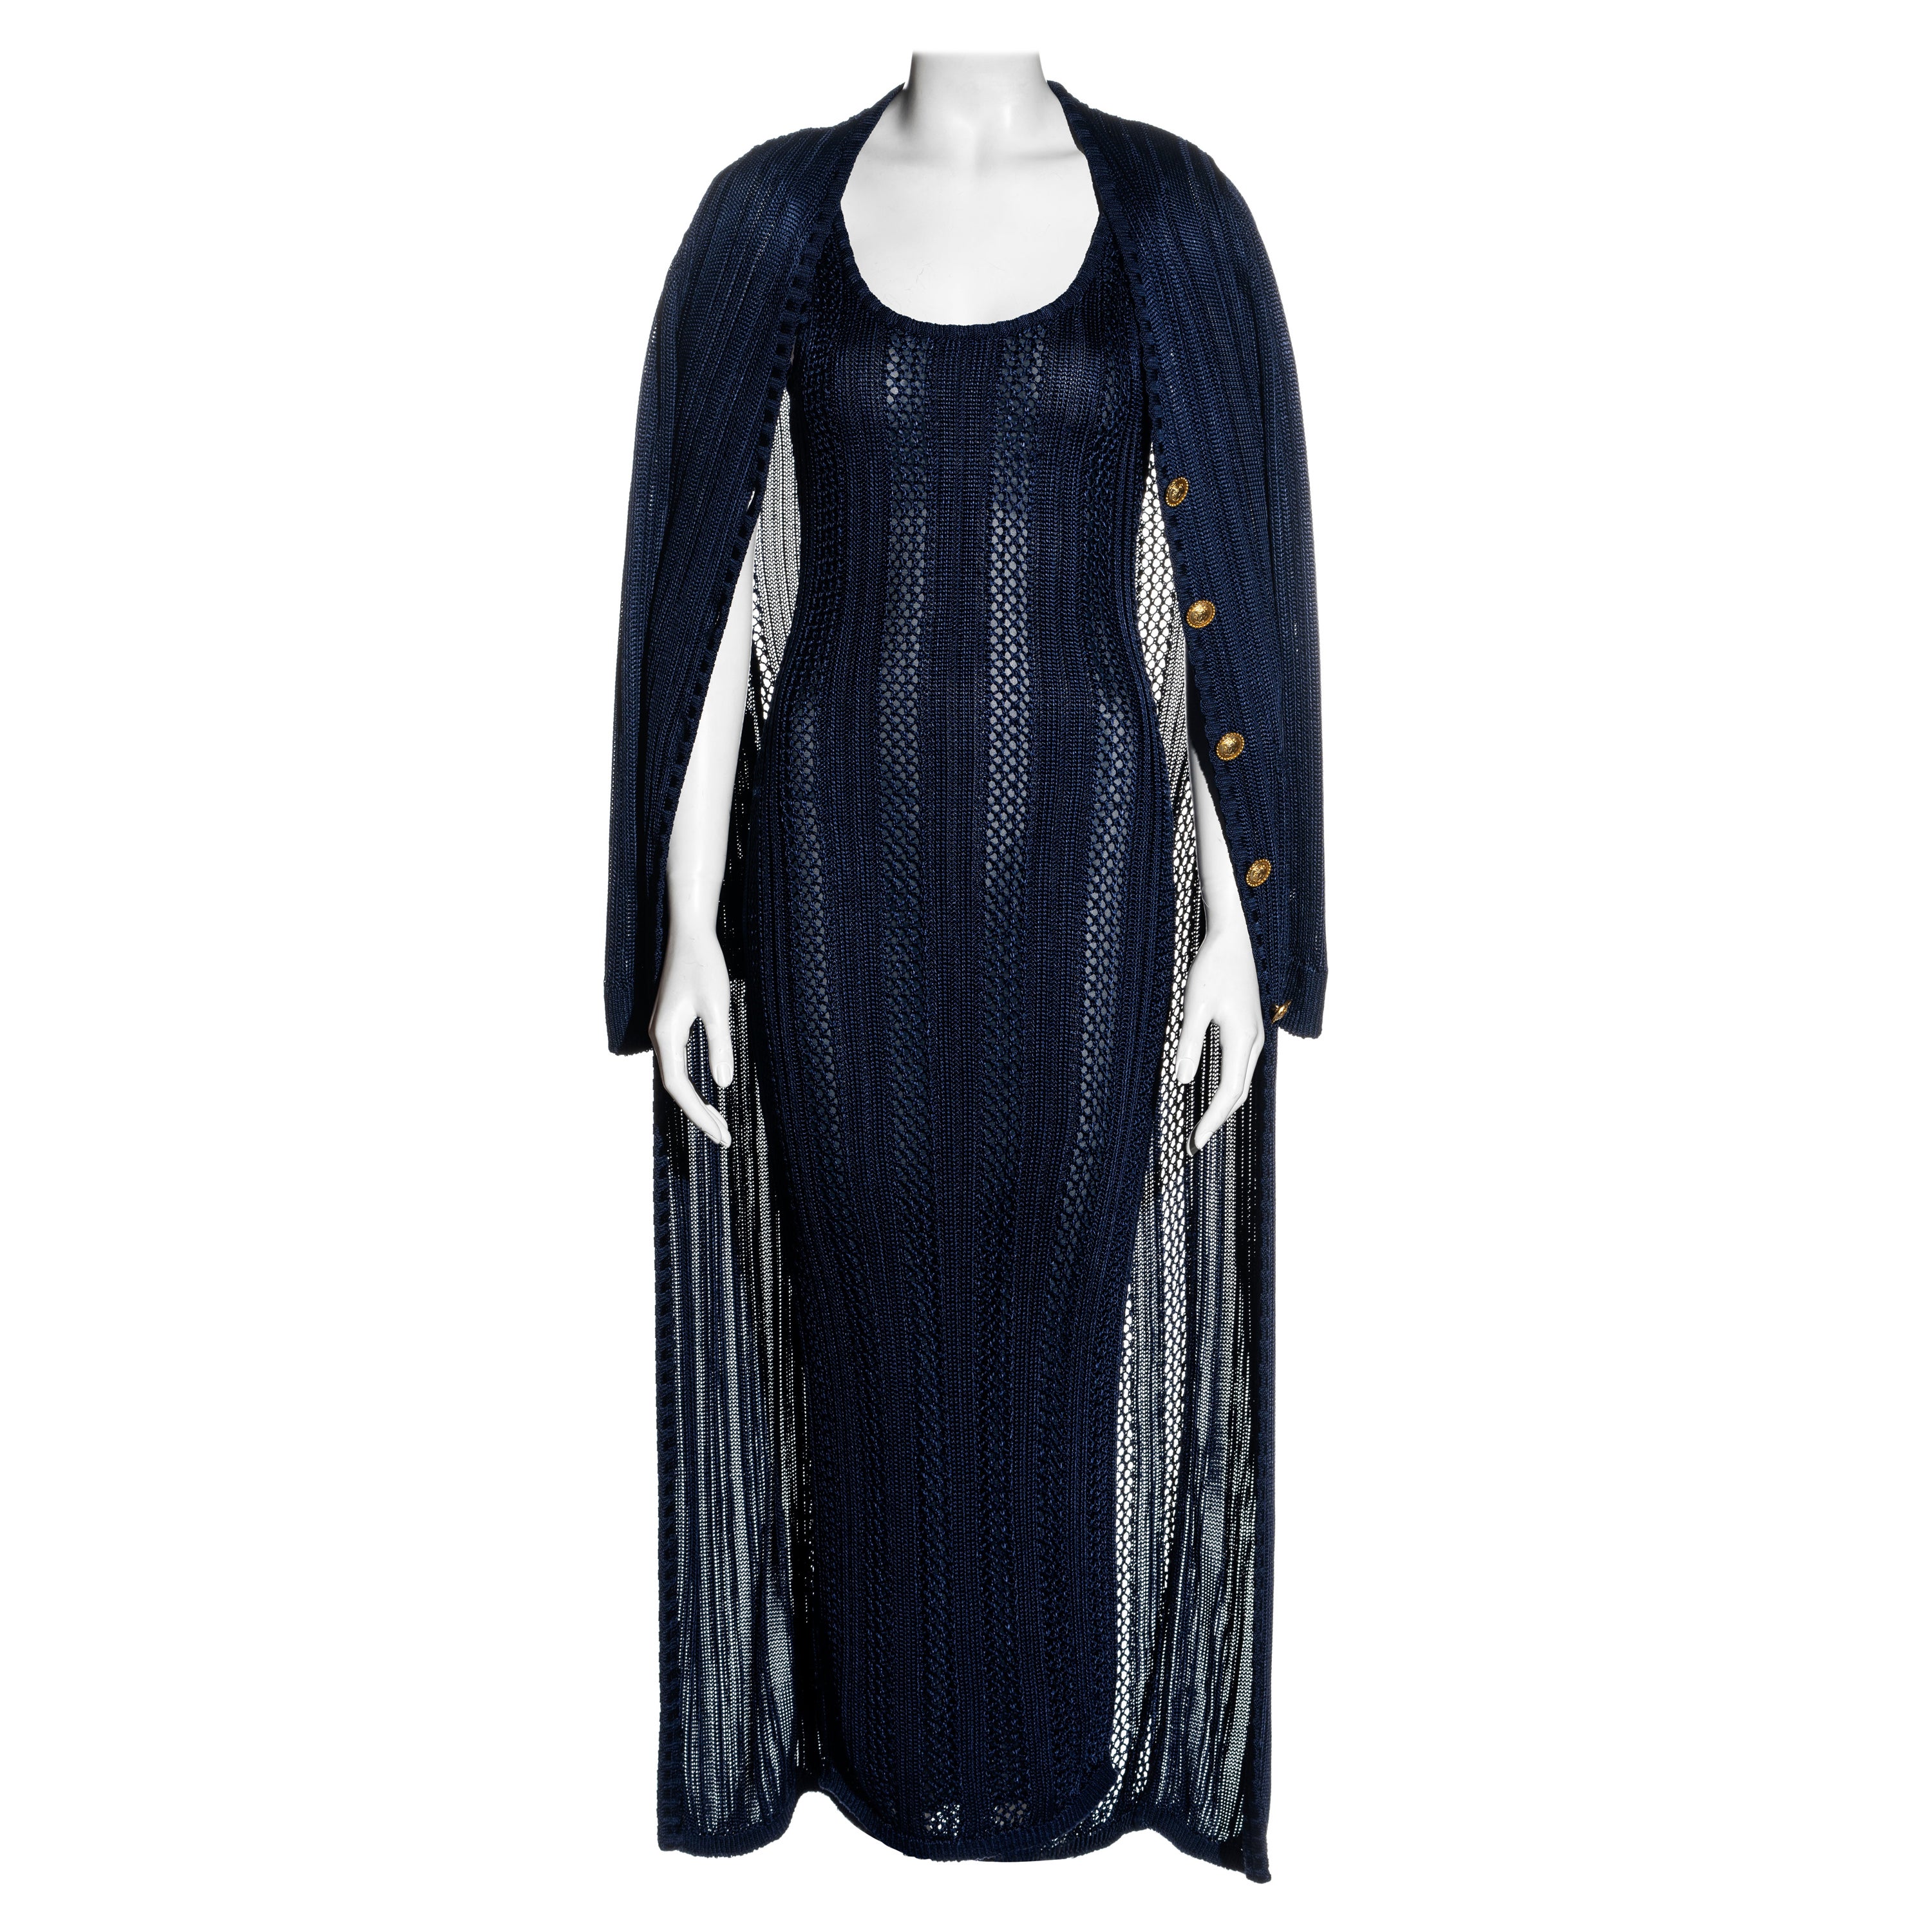 Gianni Versace navy blue open-knit bodycon dress and cardigan set, fw 1993